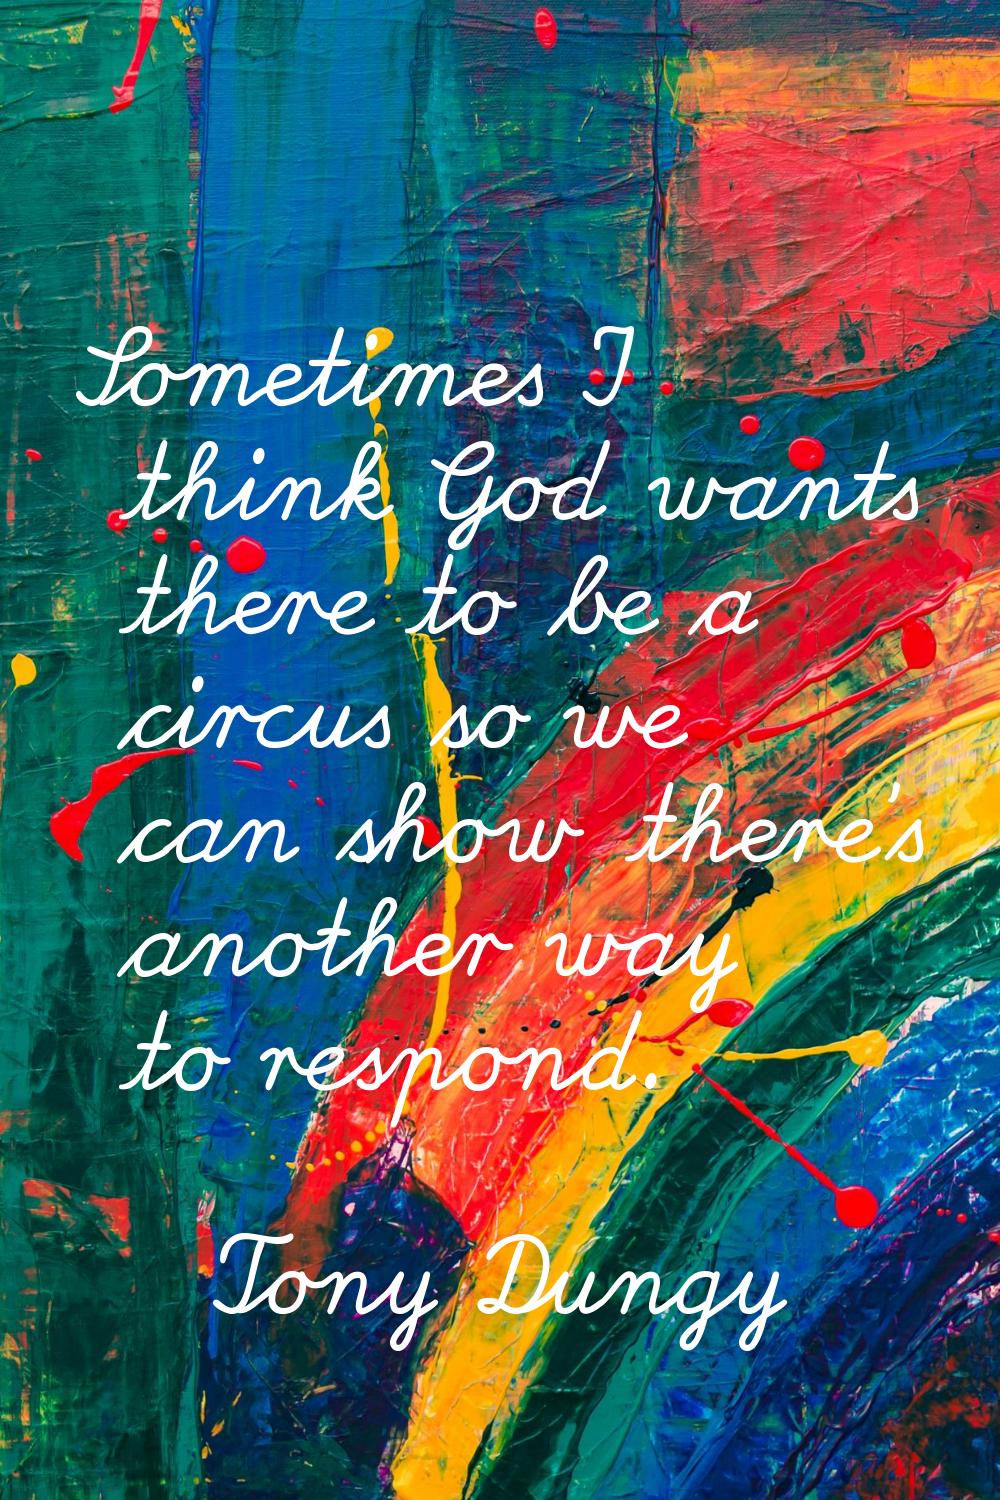 Sometimes I think God wants there to be a circus so we can show there's another way to respond.